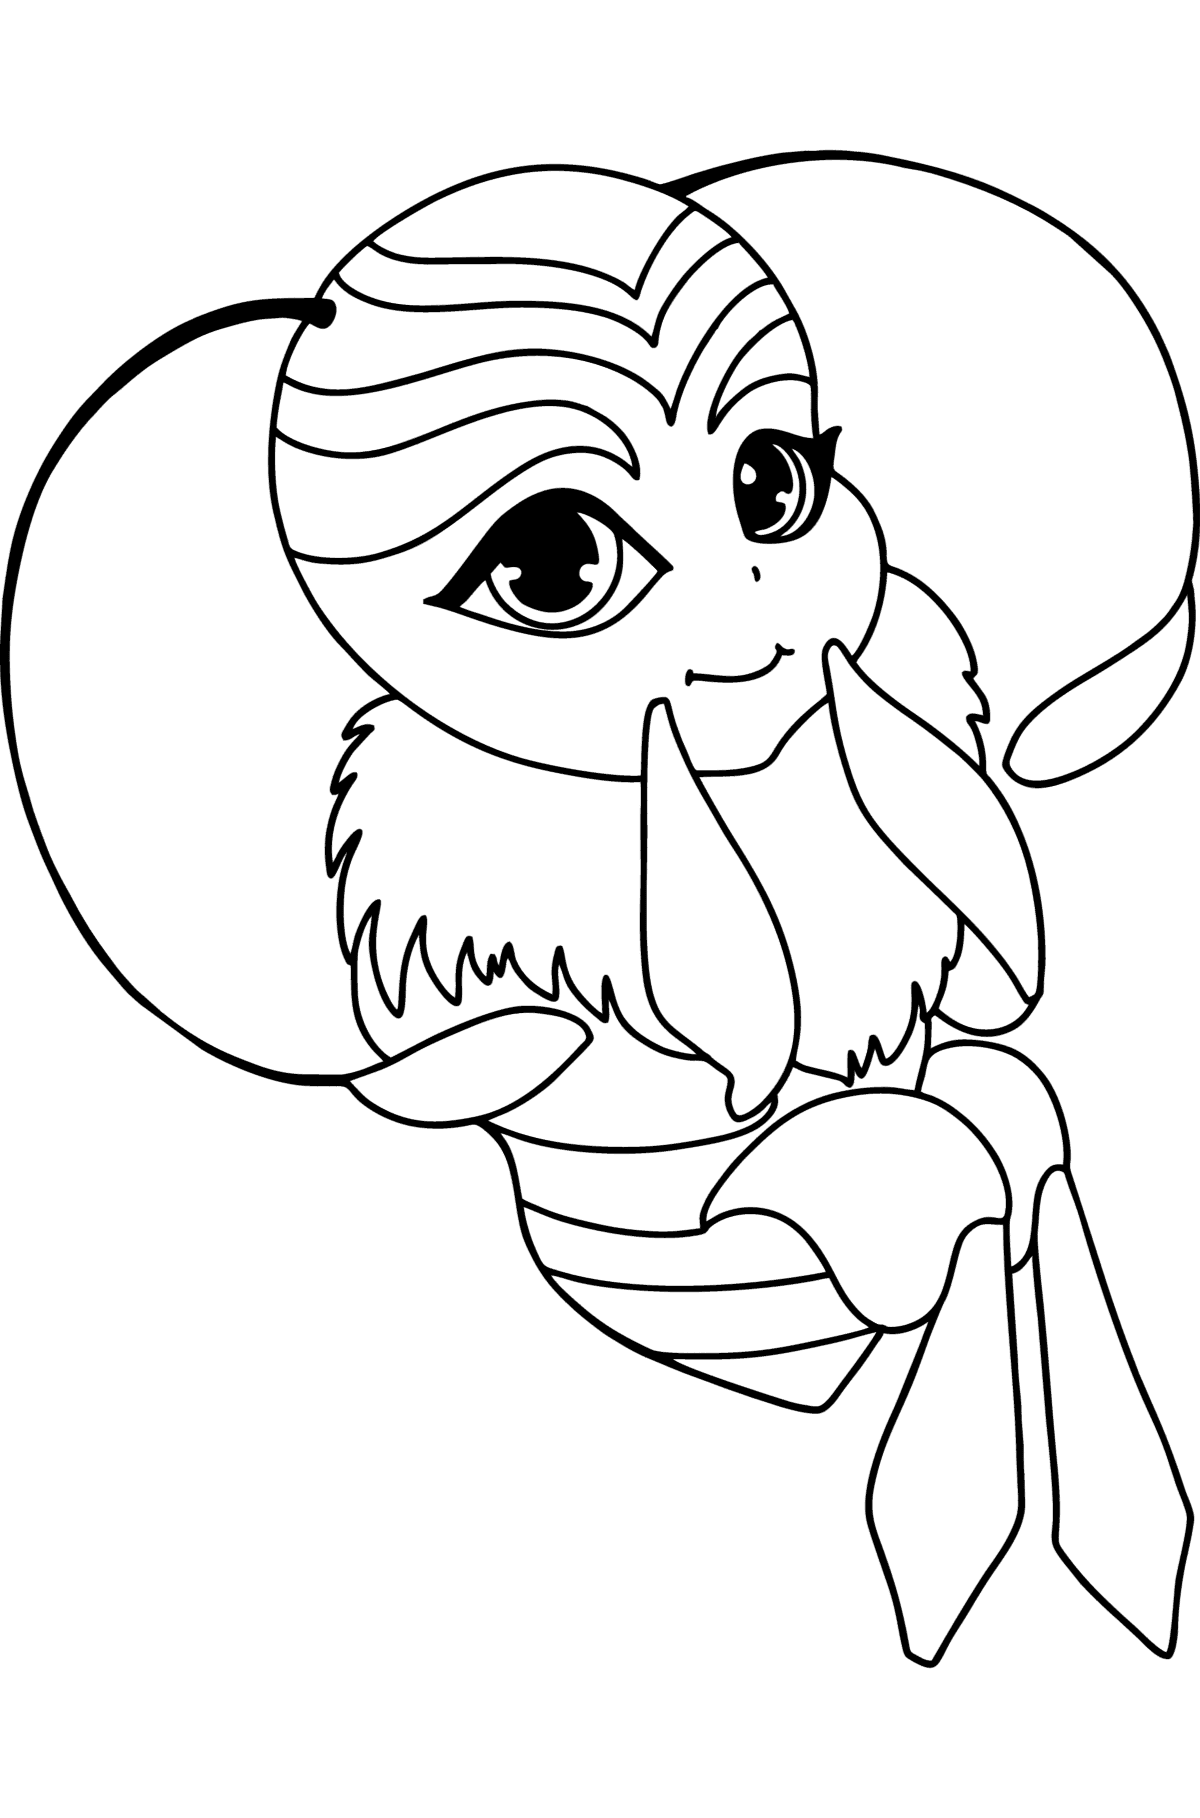 Kwami Pollen coloring page - Coloring Pages for Kids